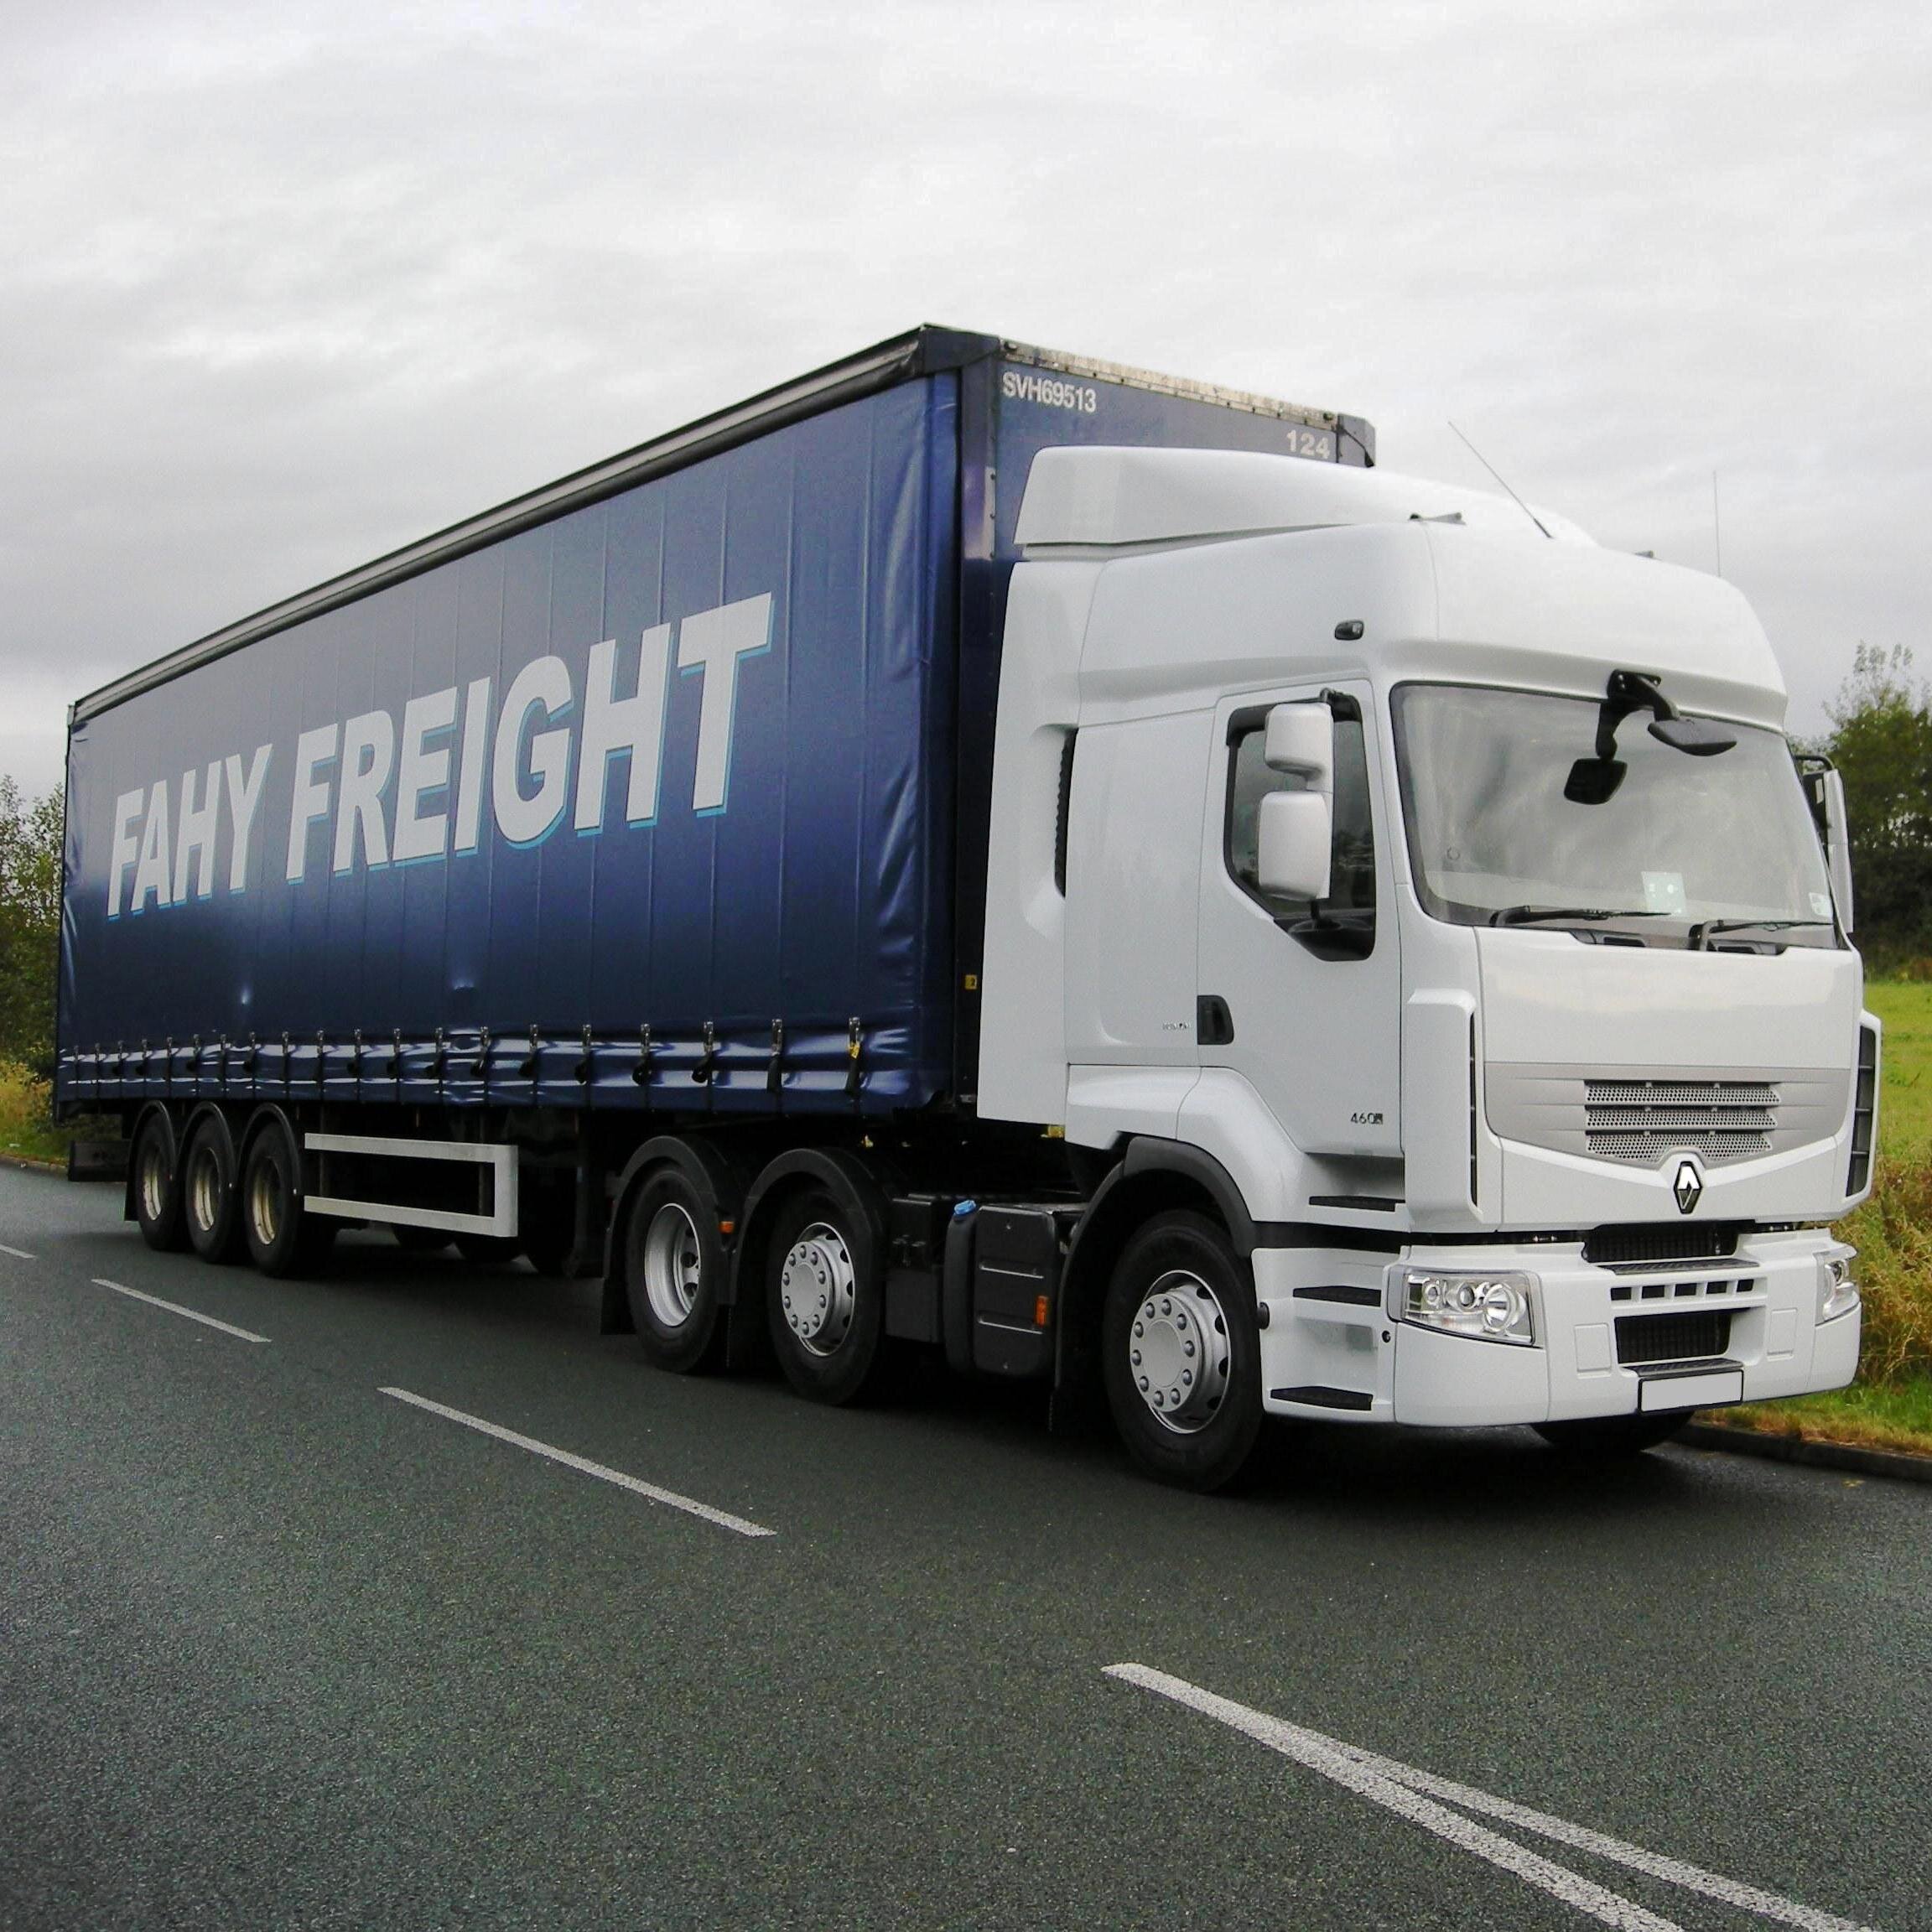 FAHY FREIGHT